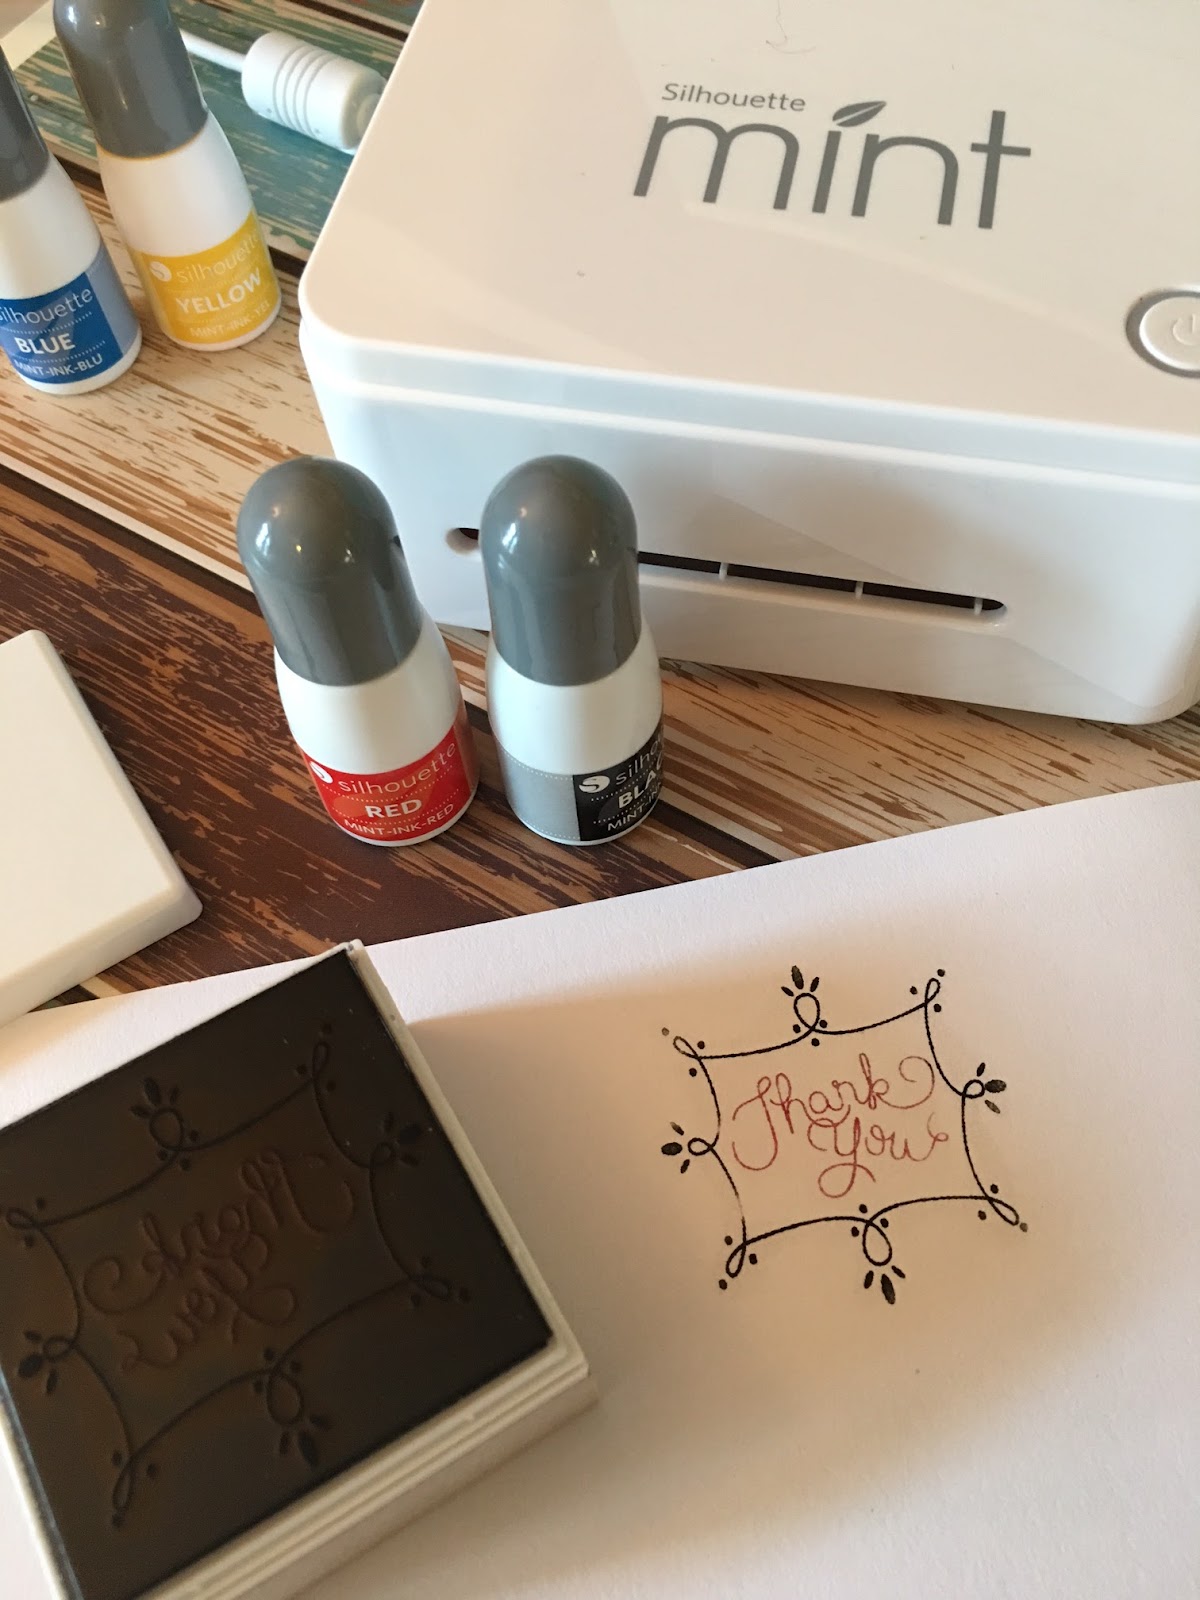 How to Use Silhouette Mint & Make a Multi-Colored Stamp